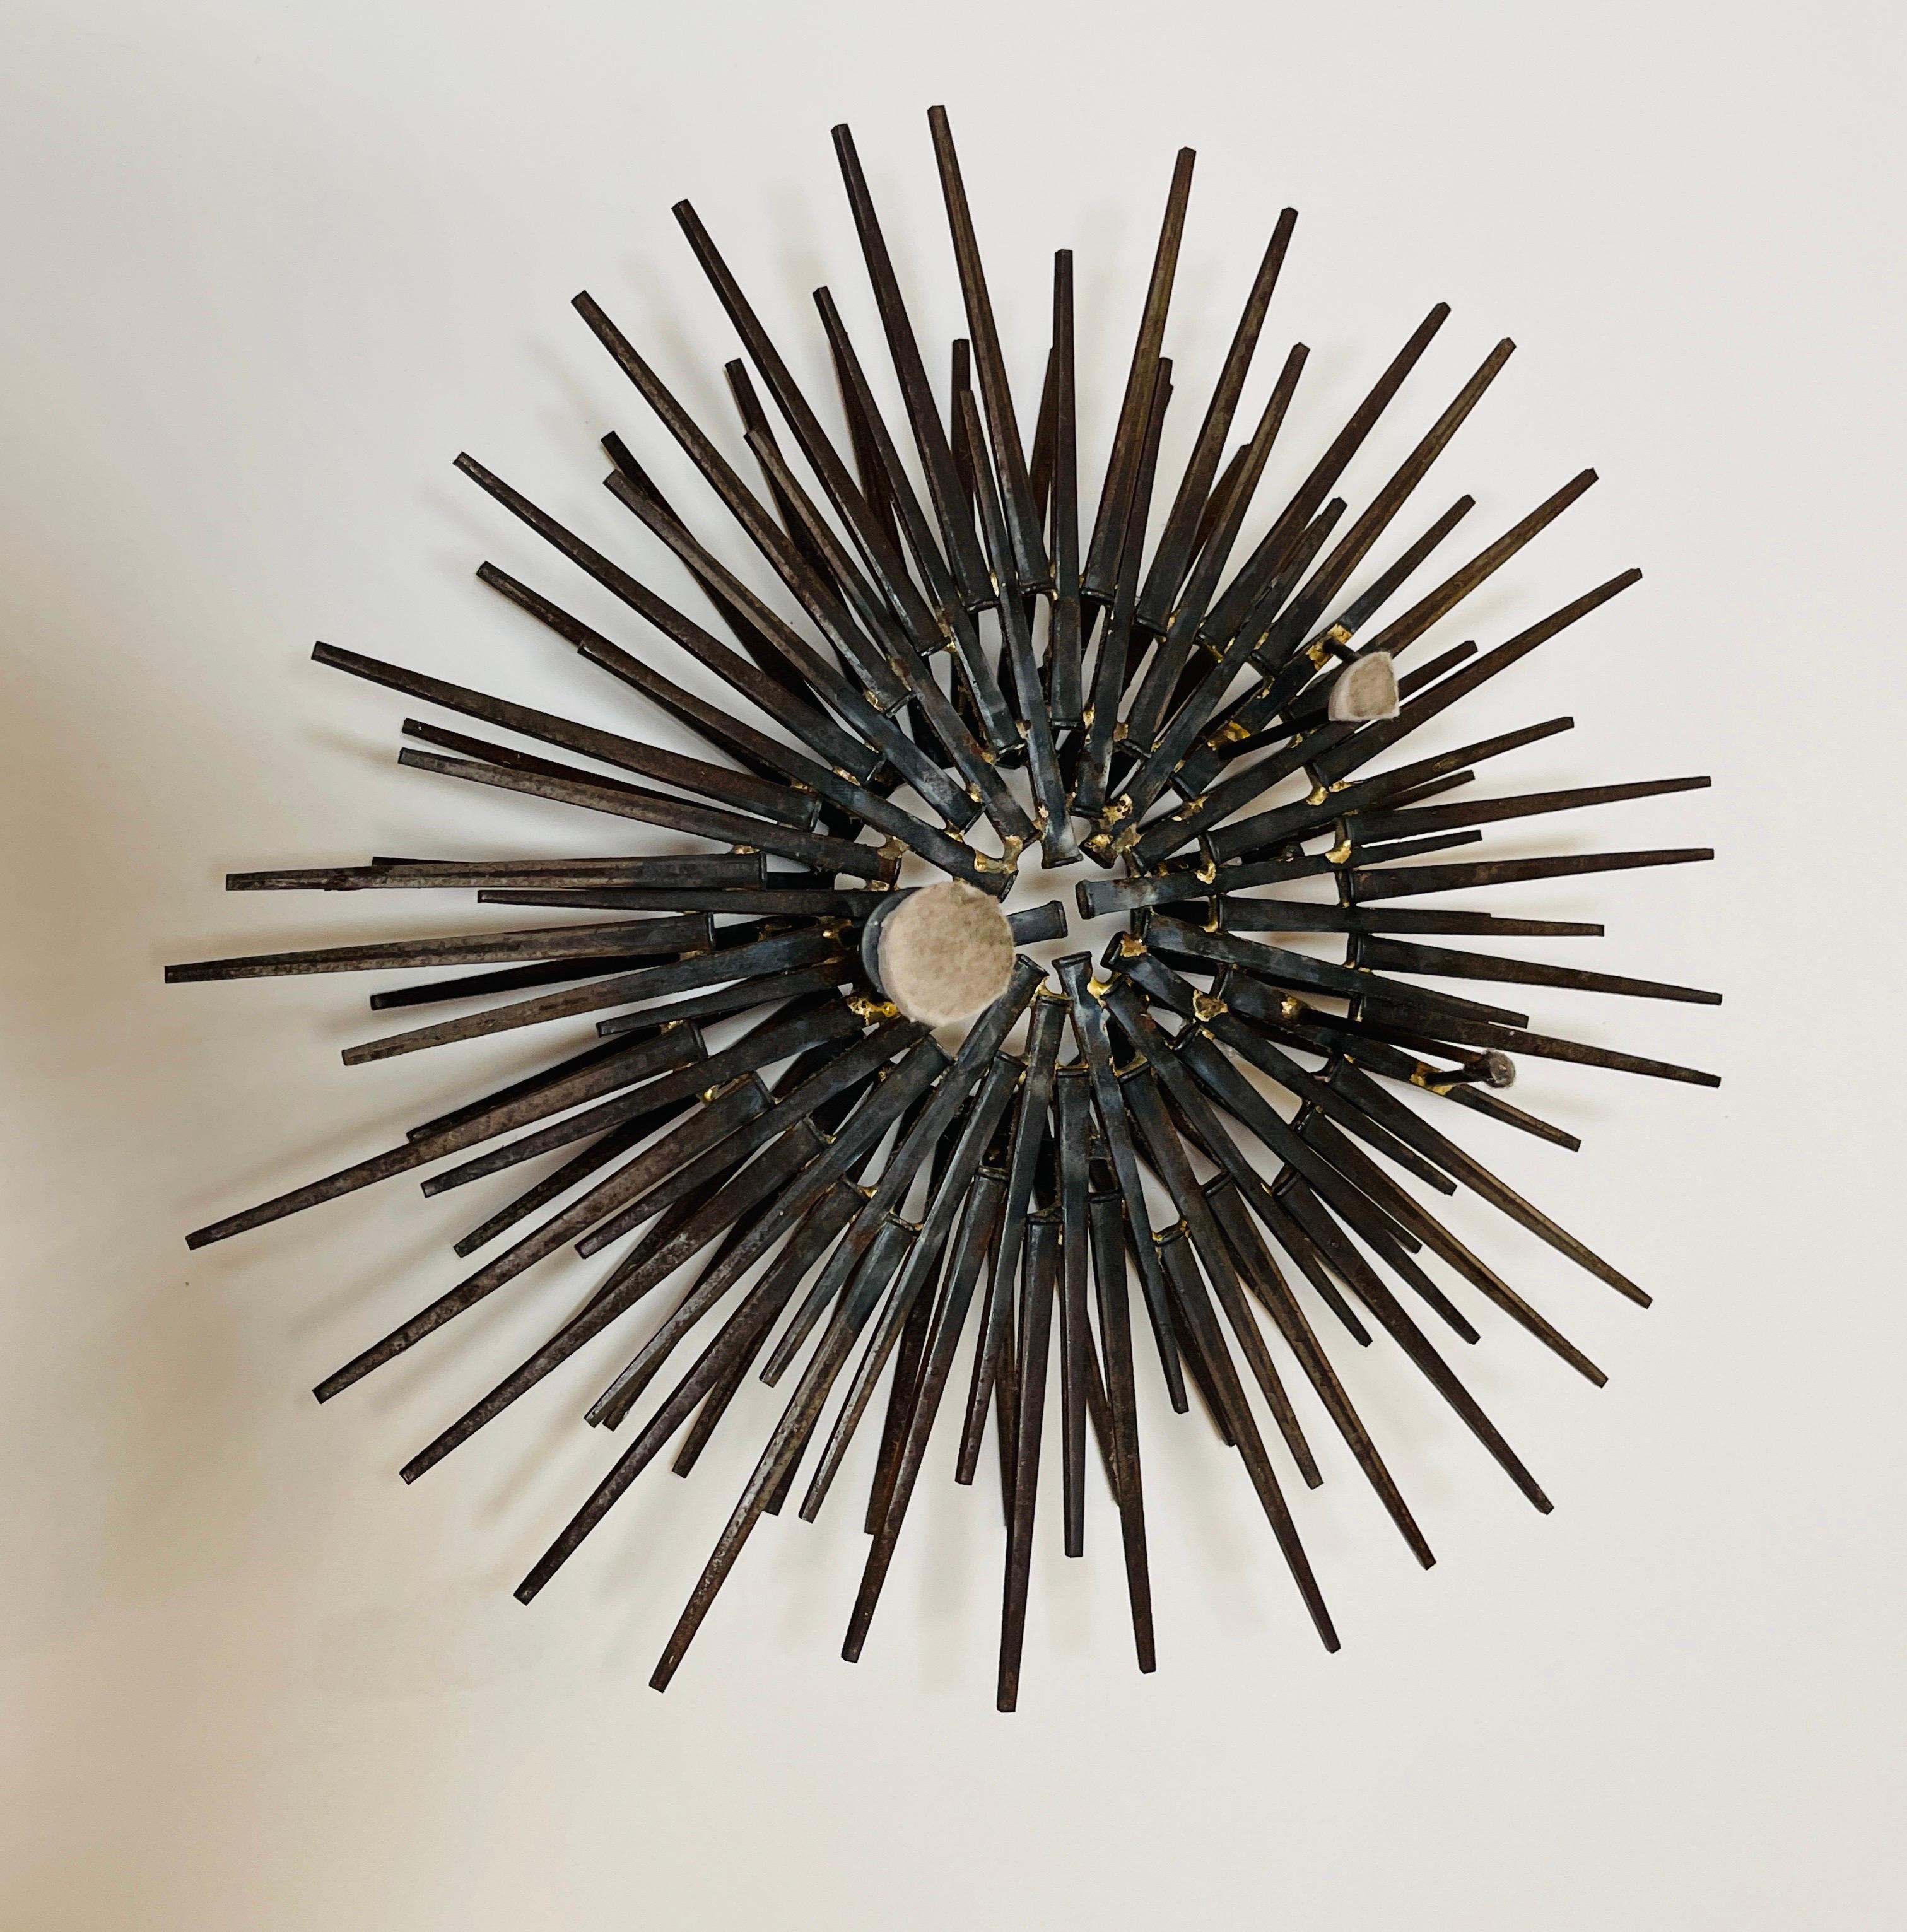 Forged Diminutive Gilt Iron Two-Tier Sunburst Wall Sculpture by William Bowie For Sale